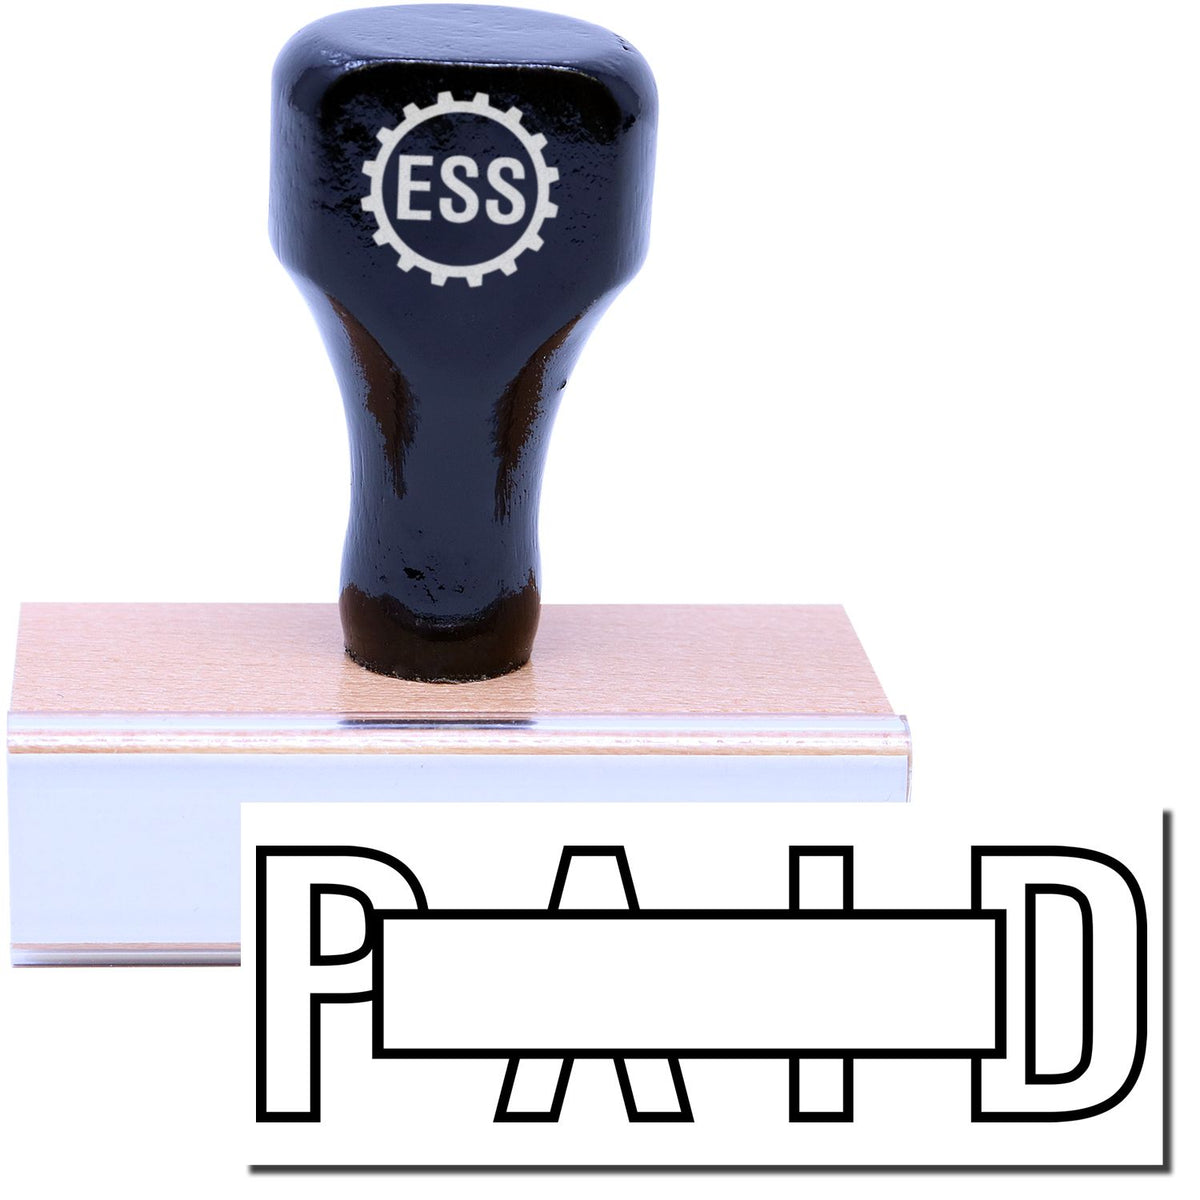 A stock office rubber stamp with a stamped image showing how the text &quot;PAID&quot; in an outline font with a box in the center of the text is displayed after stamping.